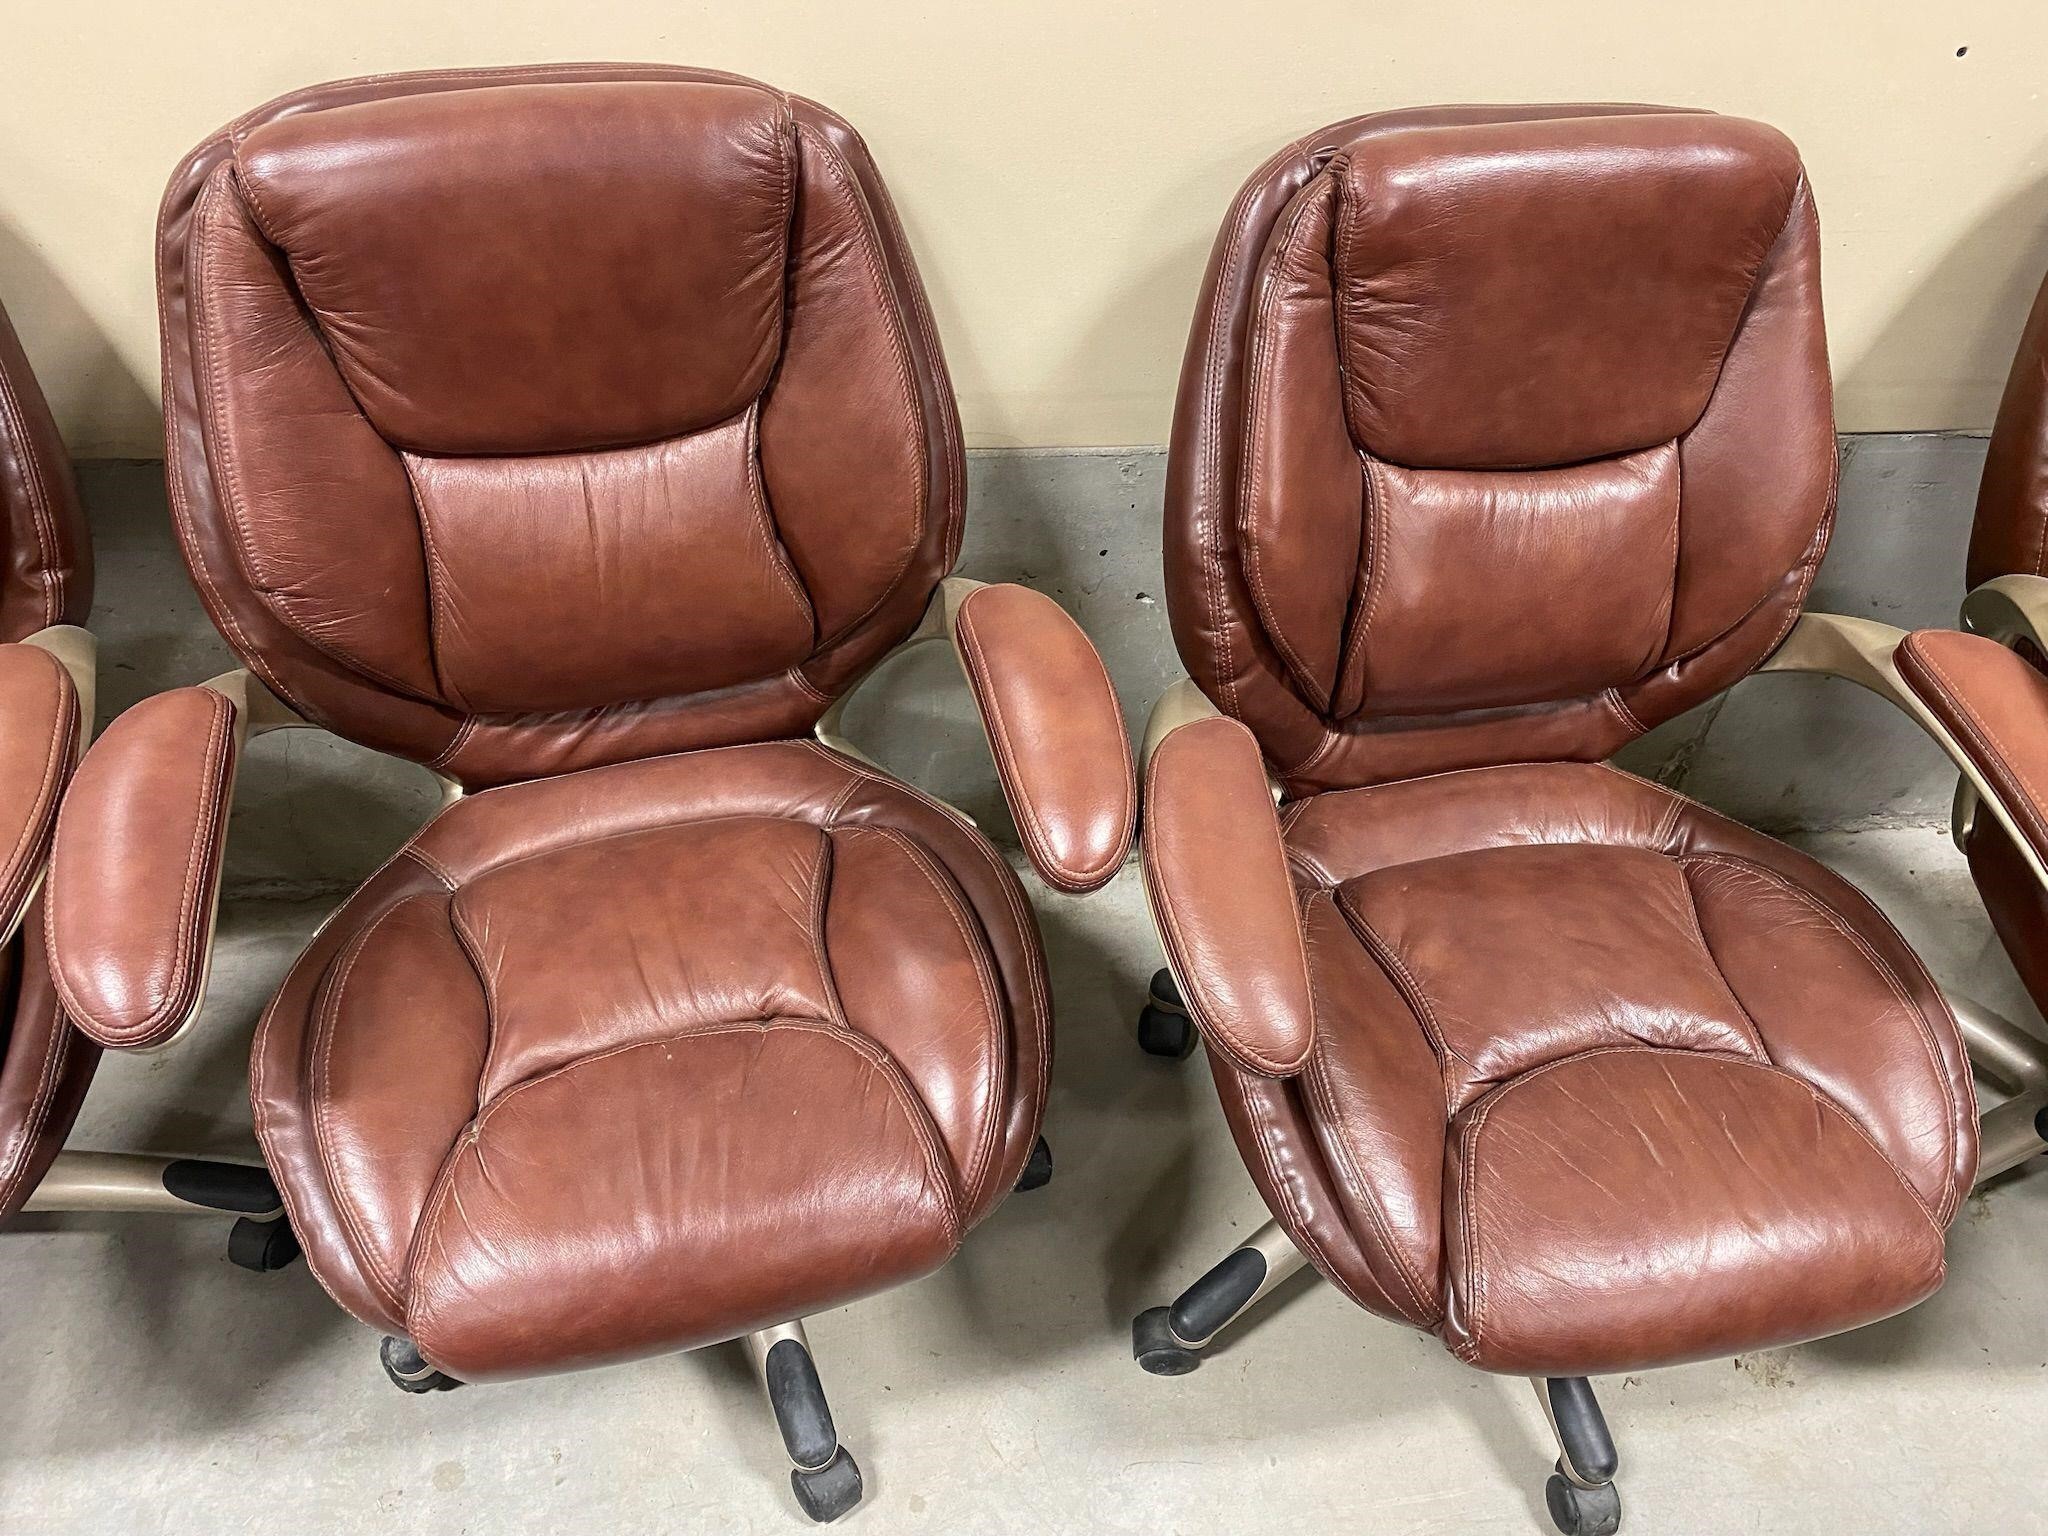 LEATHER CHAIRS - PAIR 2